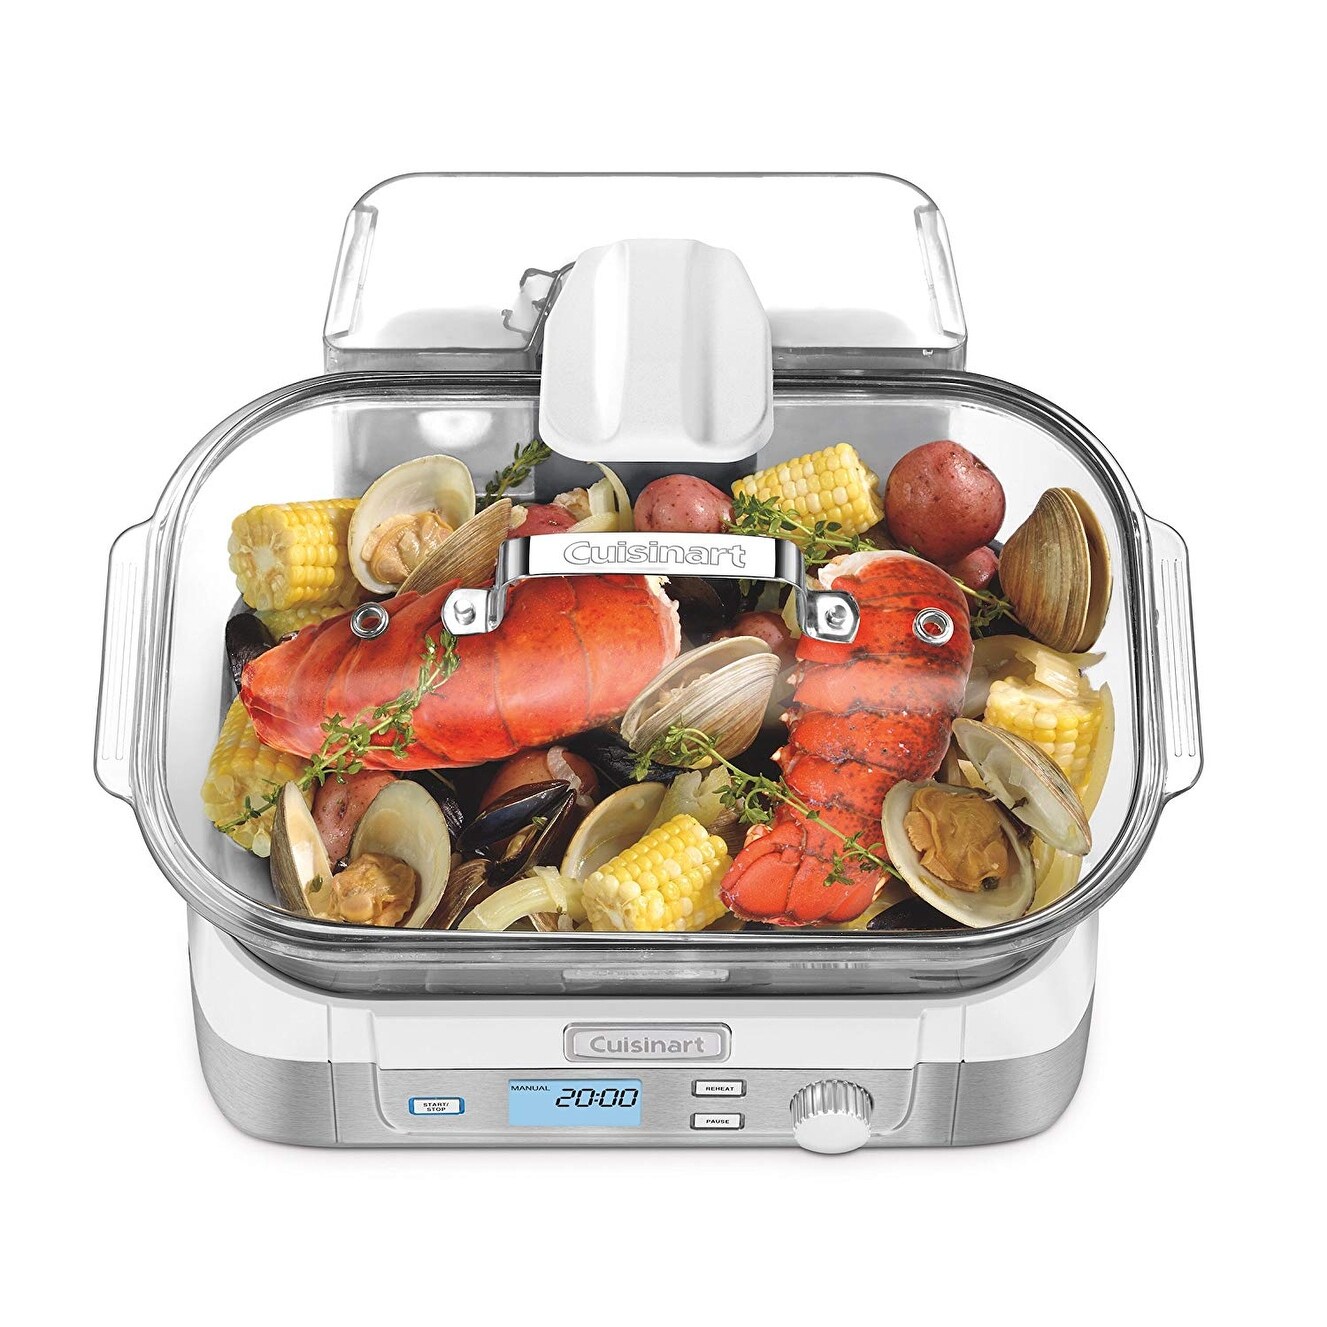 https://ak1.ostkcdn.com/images/products/is/images/direct/33252ee4cfb1c476be700154c303686681414b2f/Cuisinart-STM-1000W-CookFresh-Digital-Glass-Steamer%2C-White.jpg